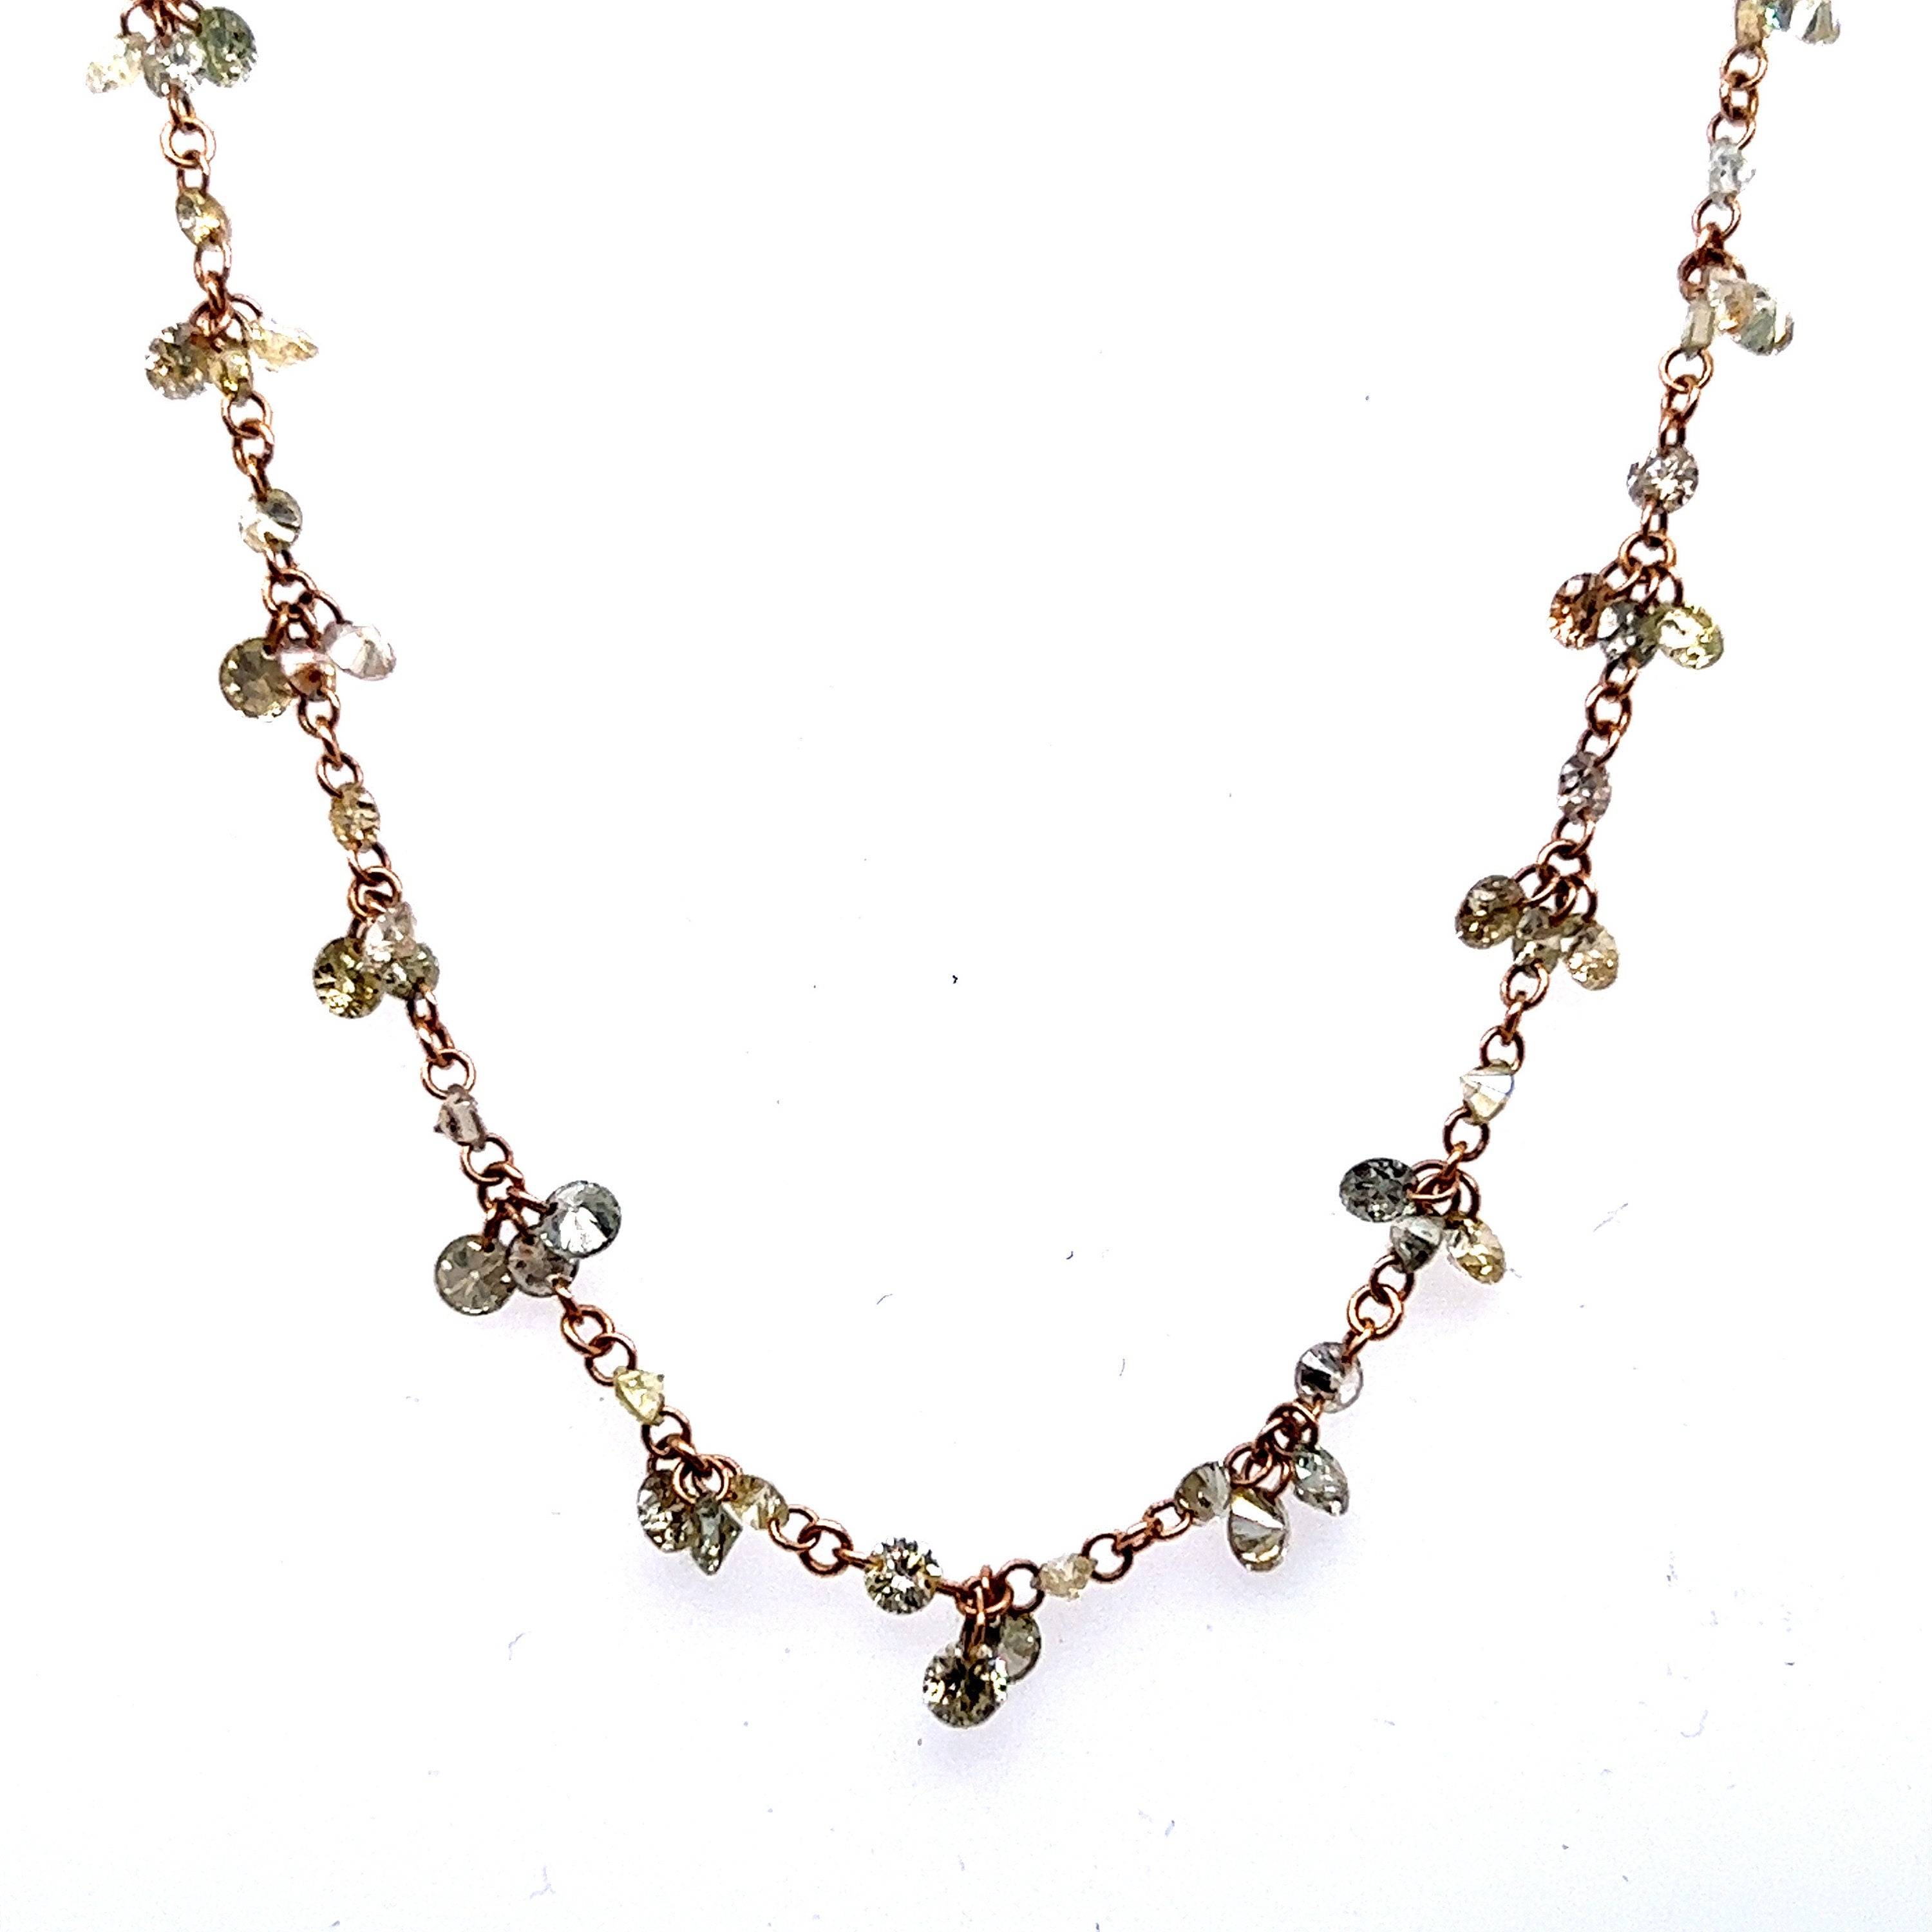 14K Rose Gold Champagne Diamond Necklace - 7.14ct.